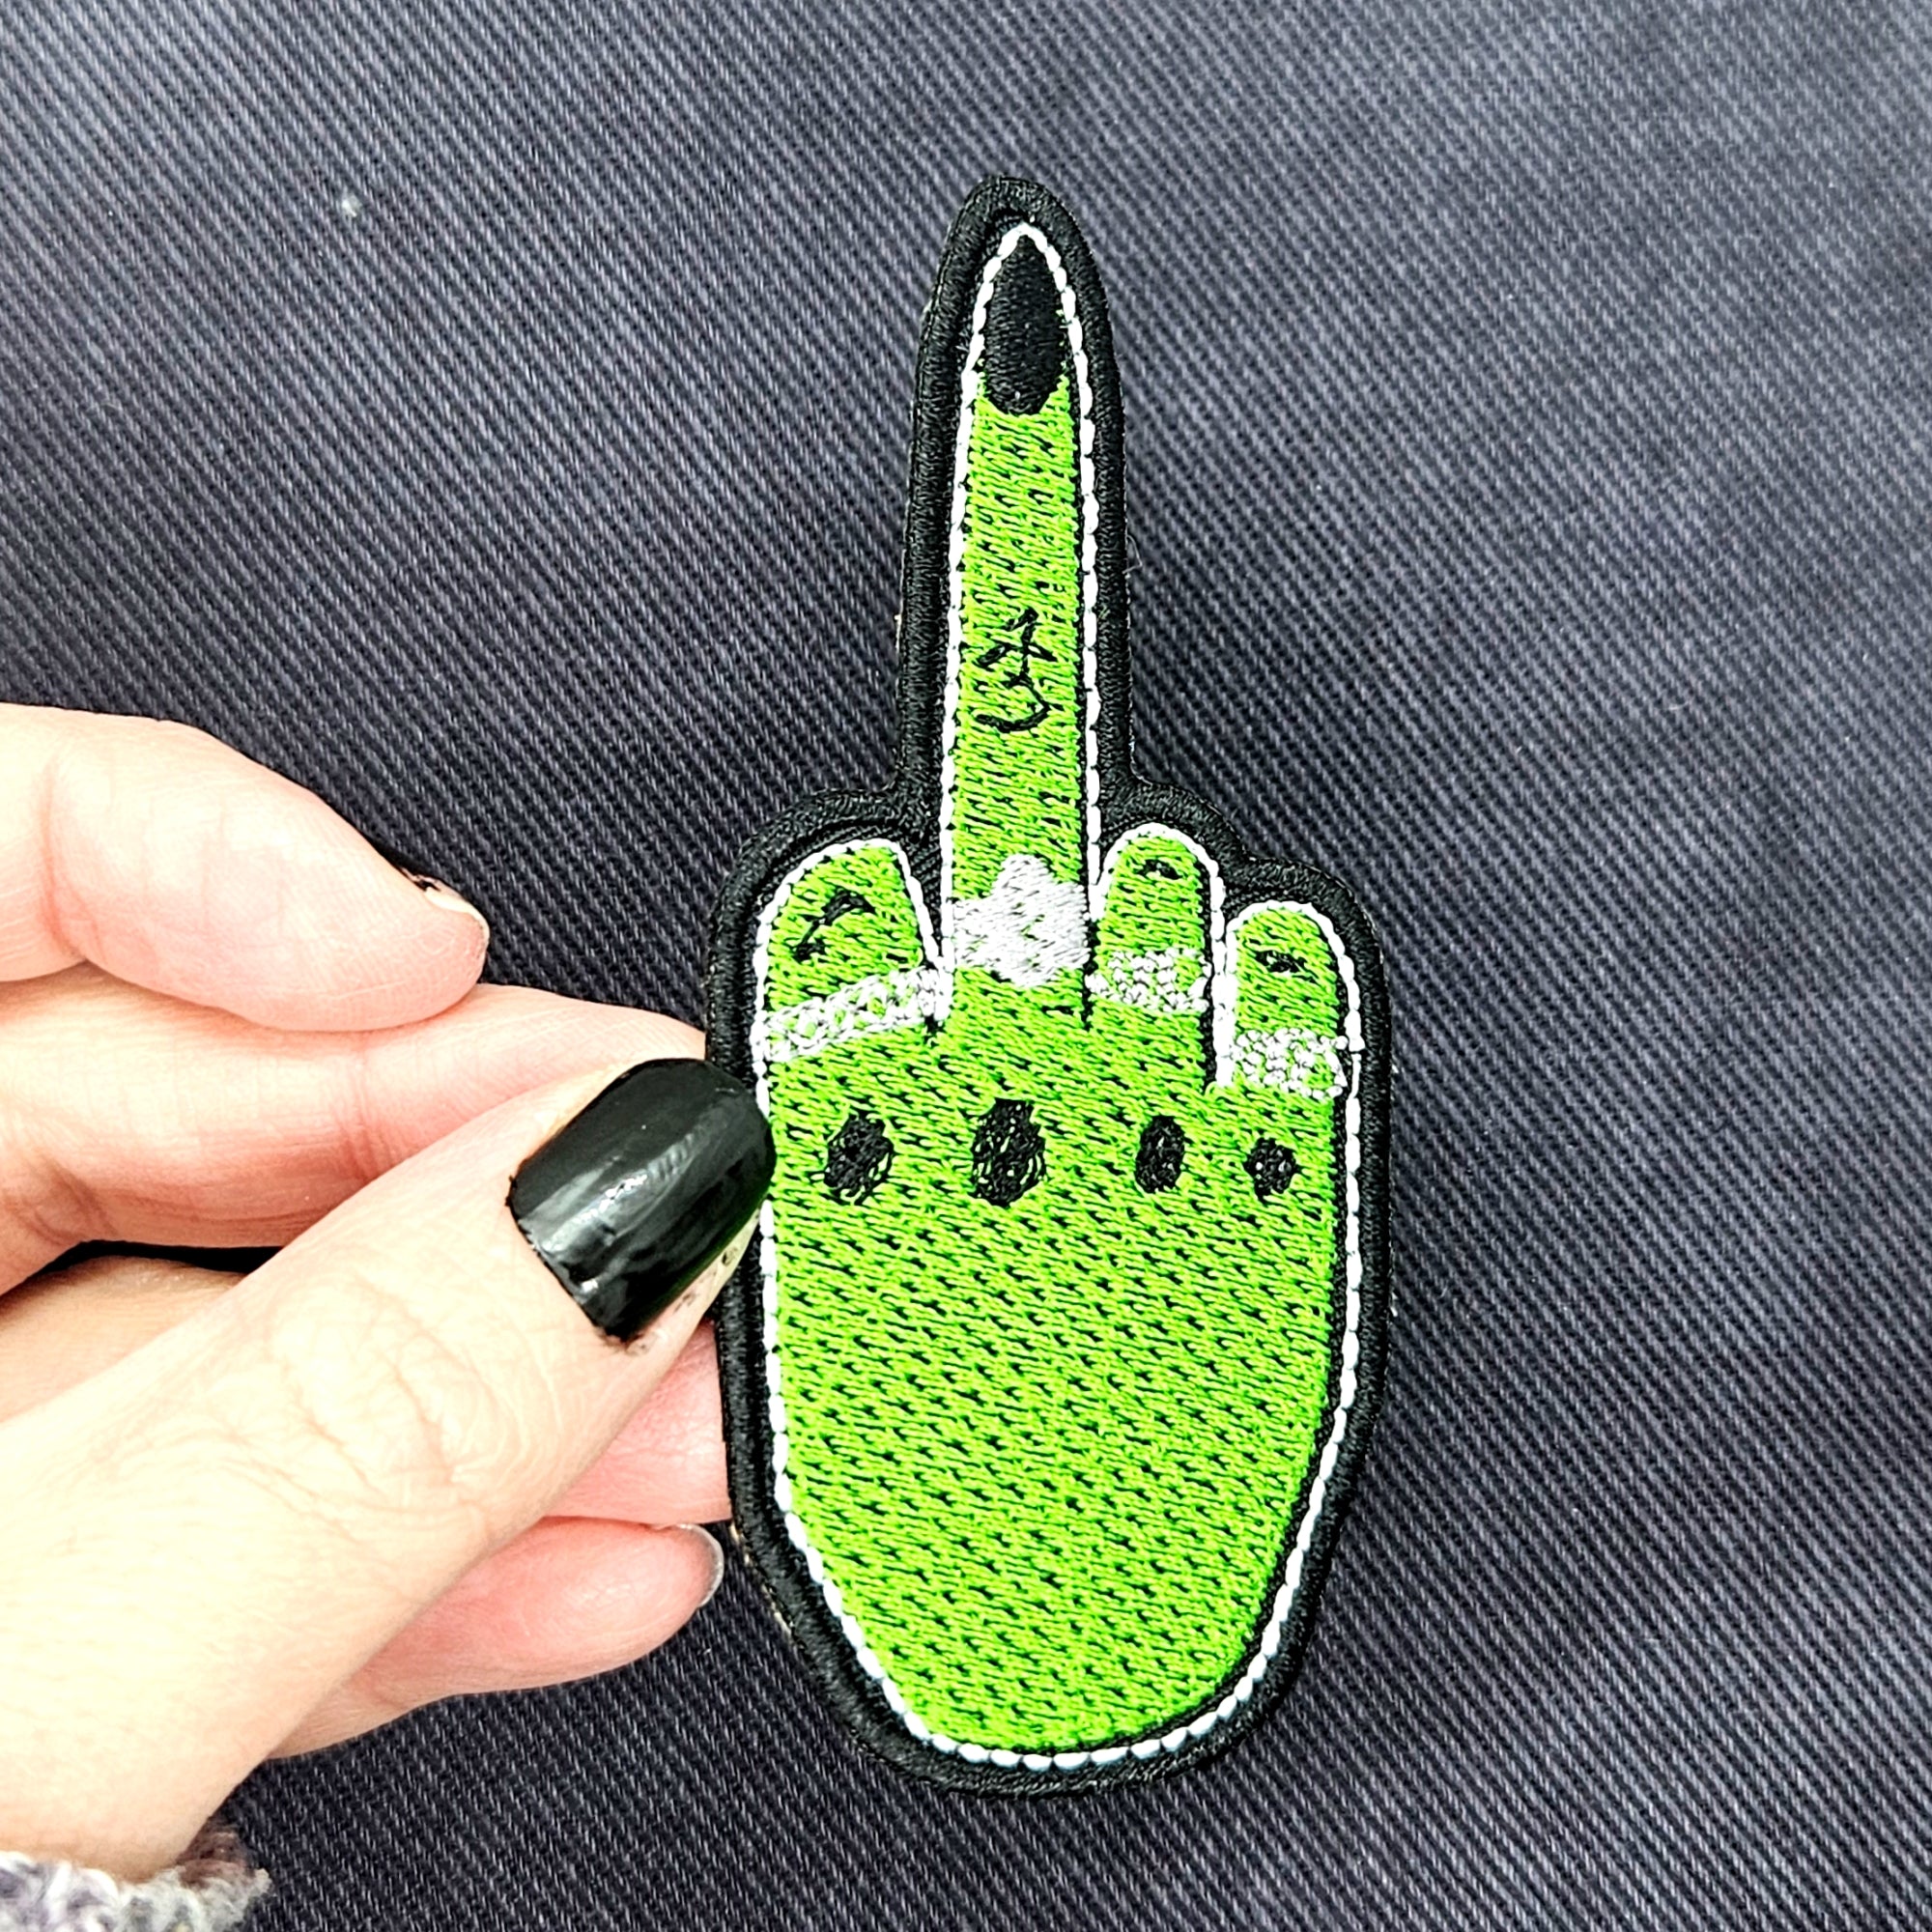 Witches Middle Finger Patch